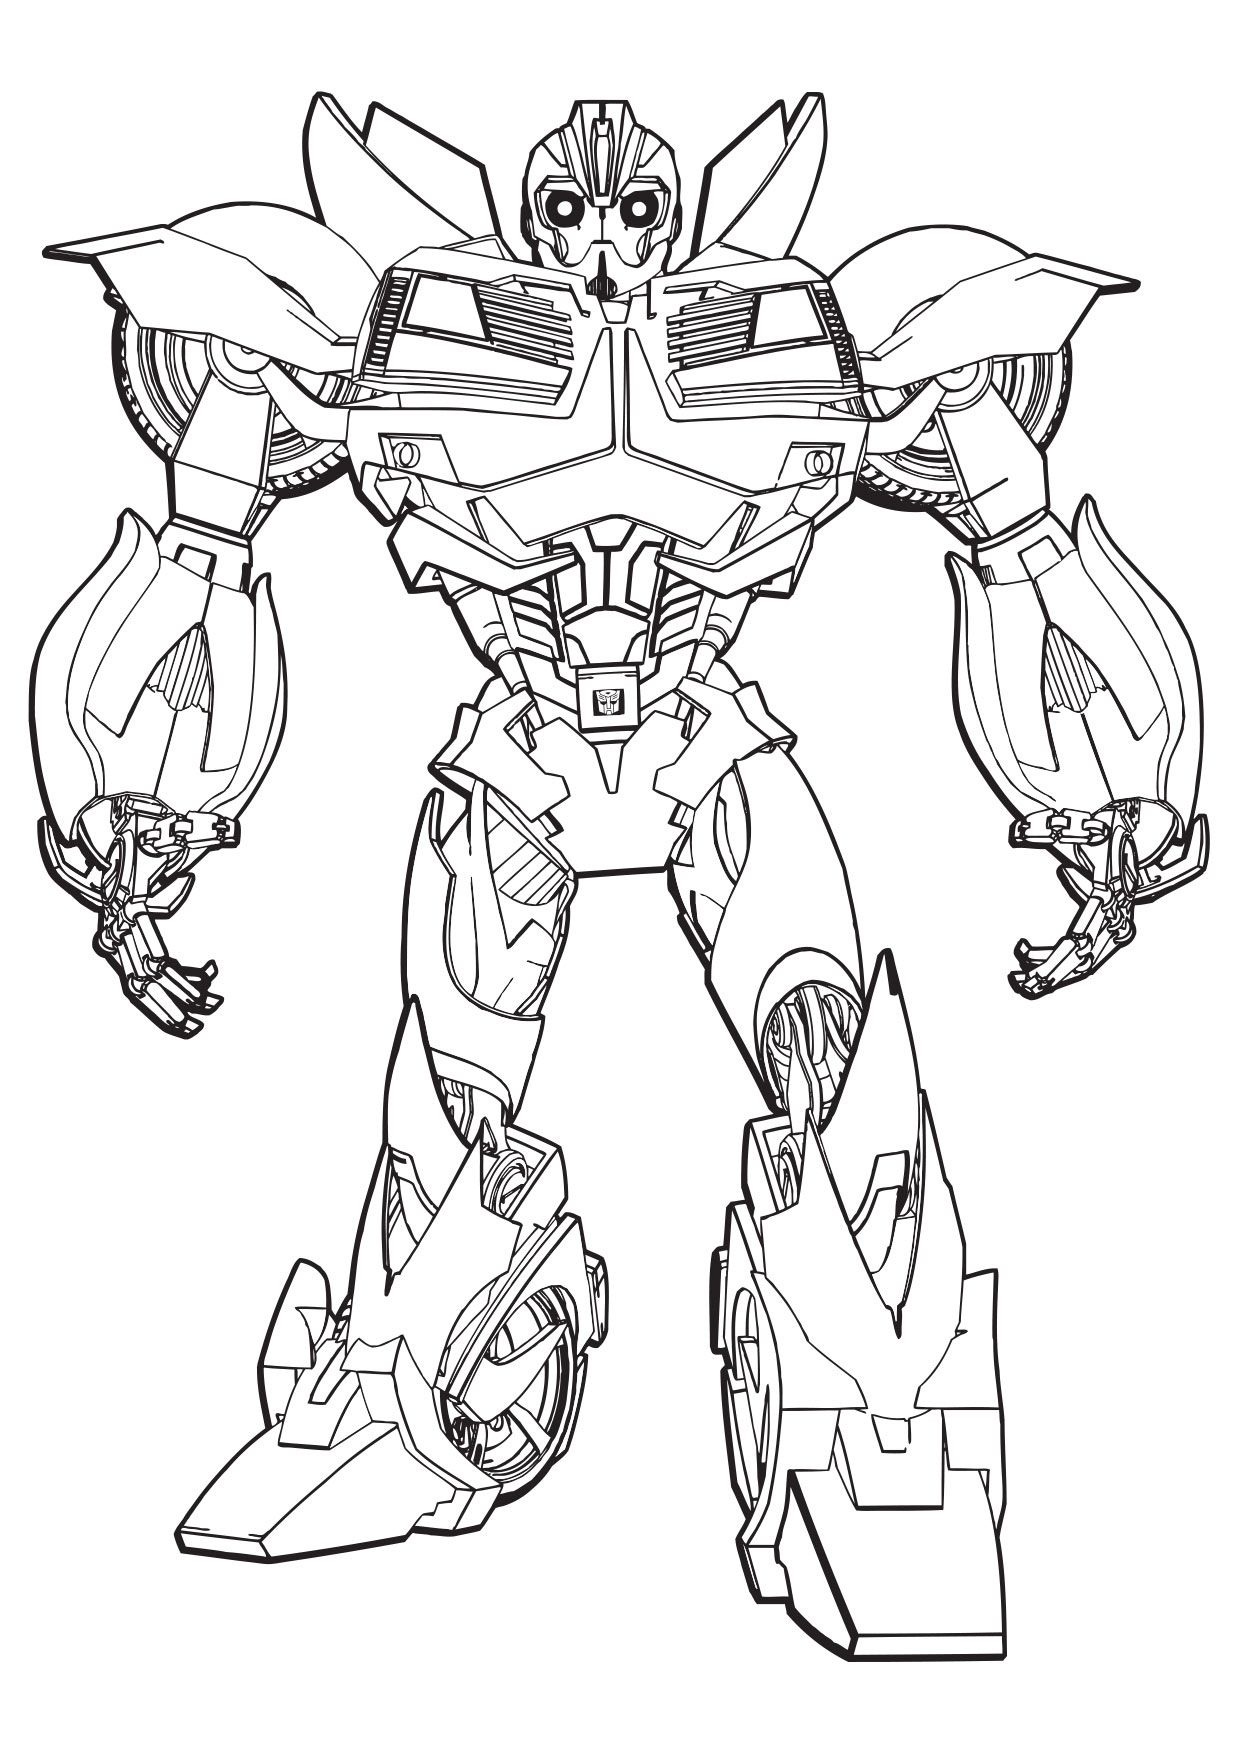 Download Cool Bumblebee Coloring Page - Free Printable Coloring ...